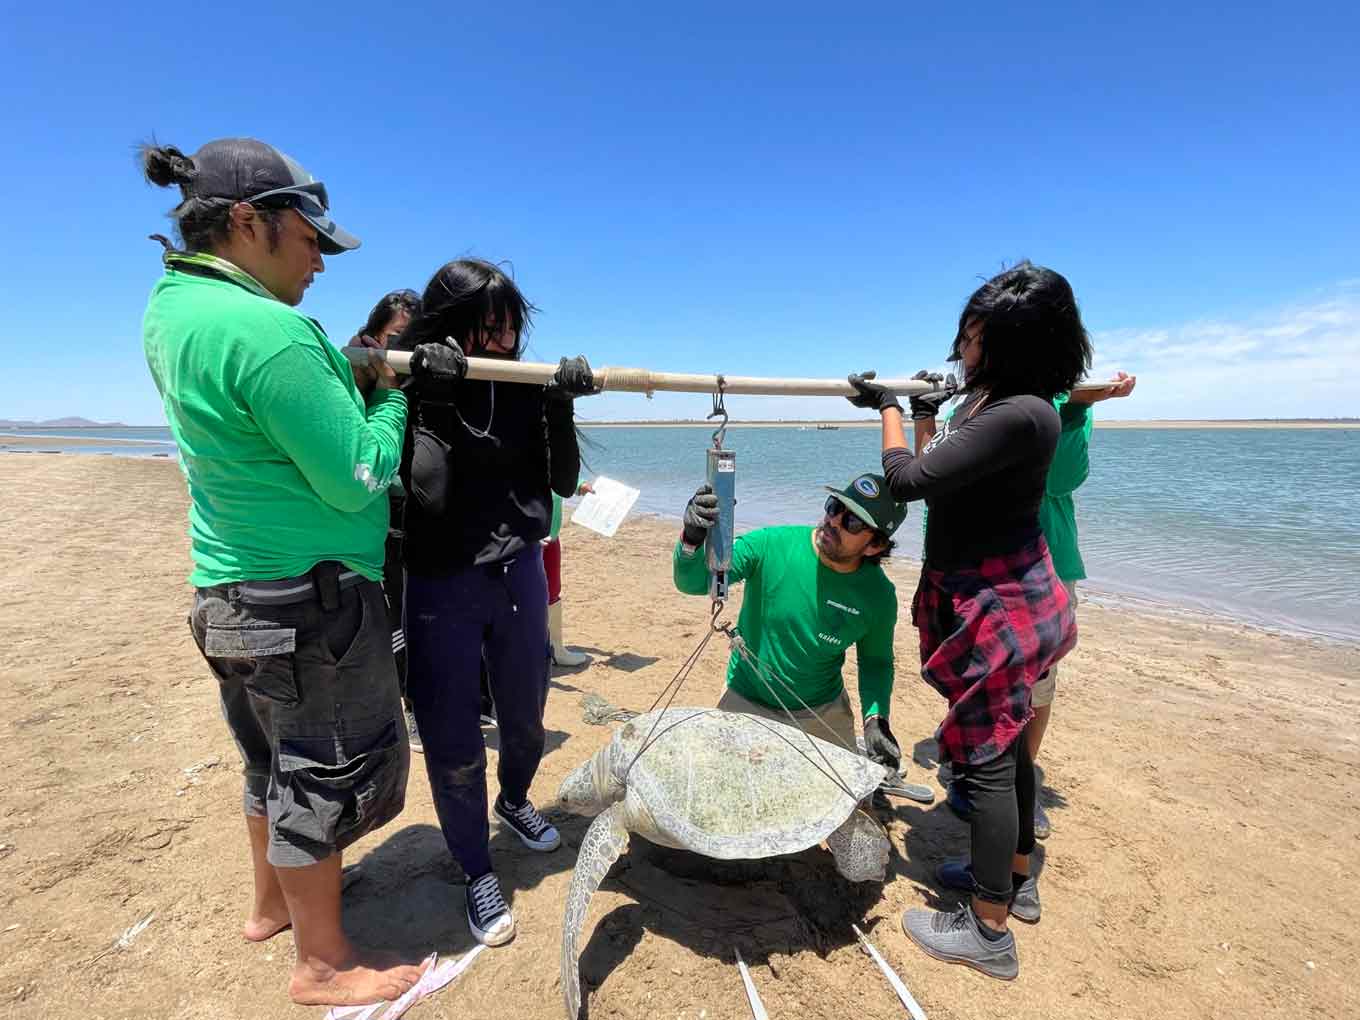 The Comcáac youth weighting a turtle